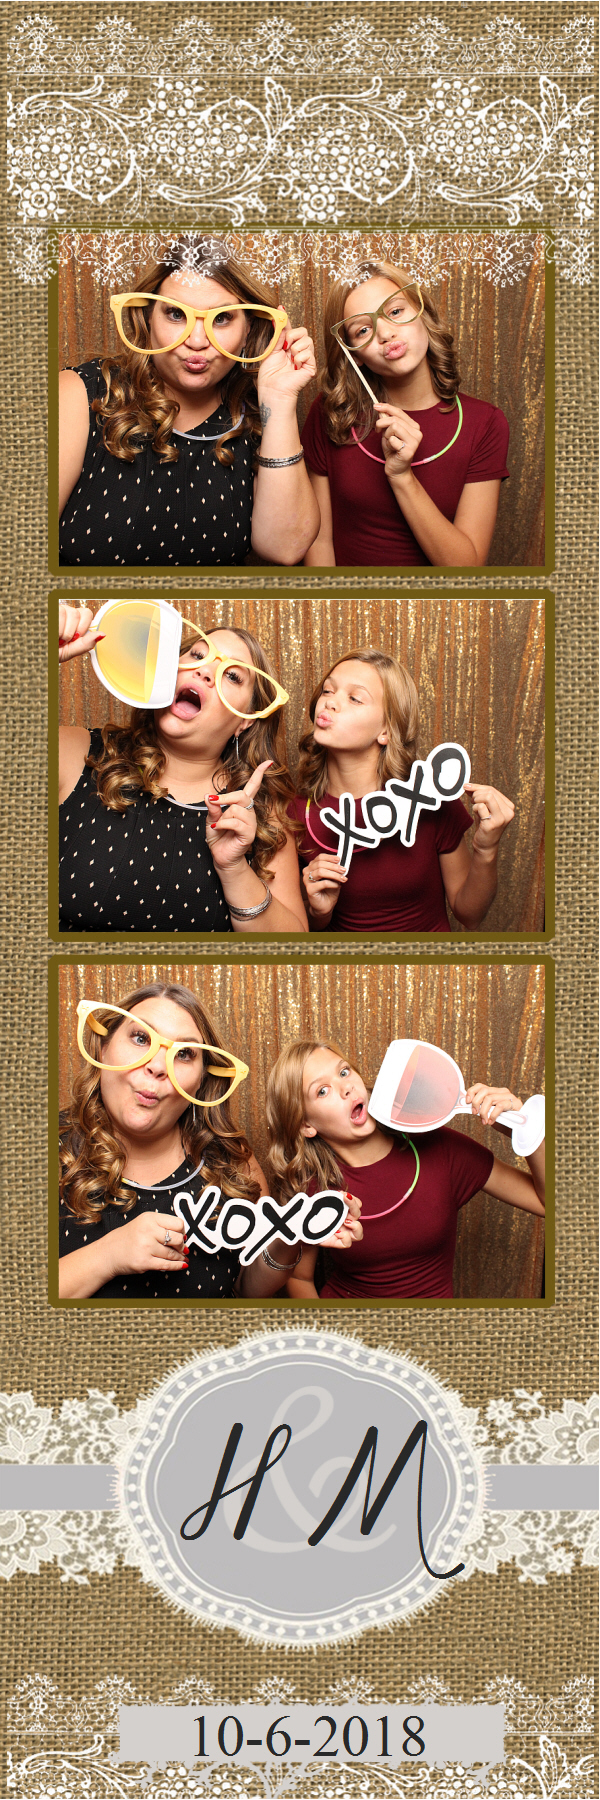 2x6 photo template of two women posing with props and shiny backdrop